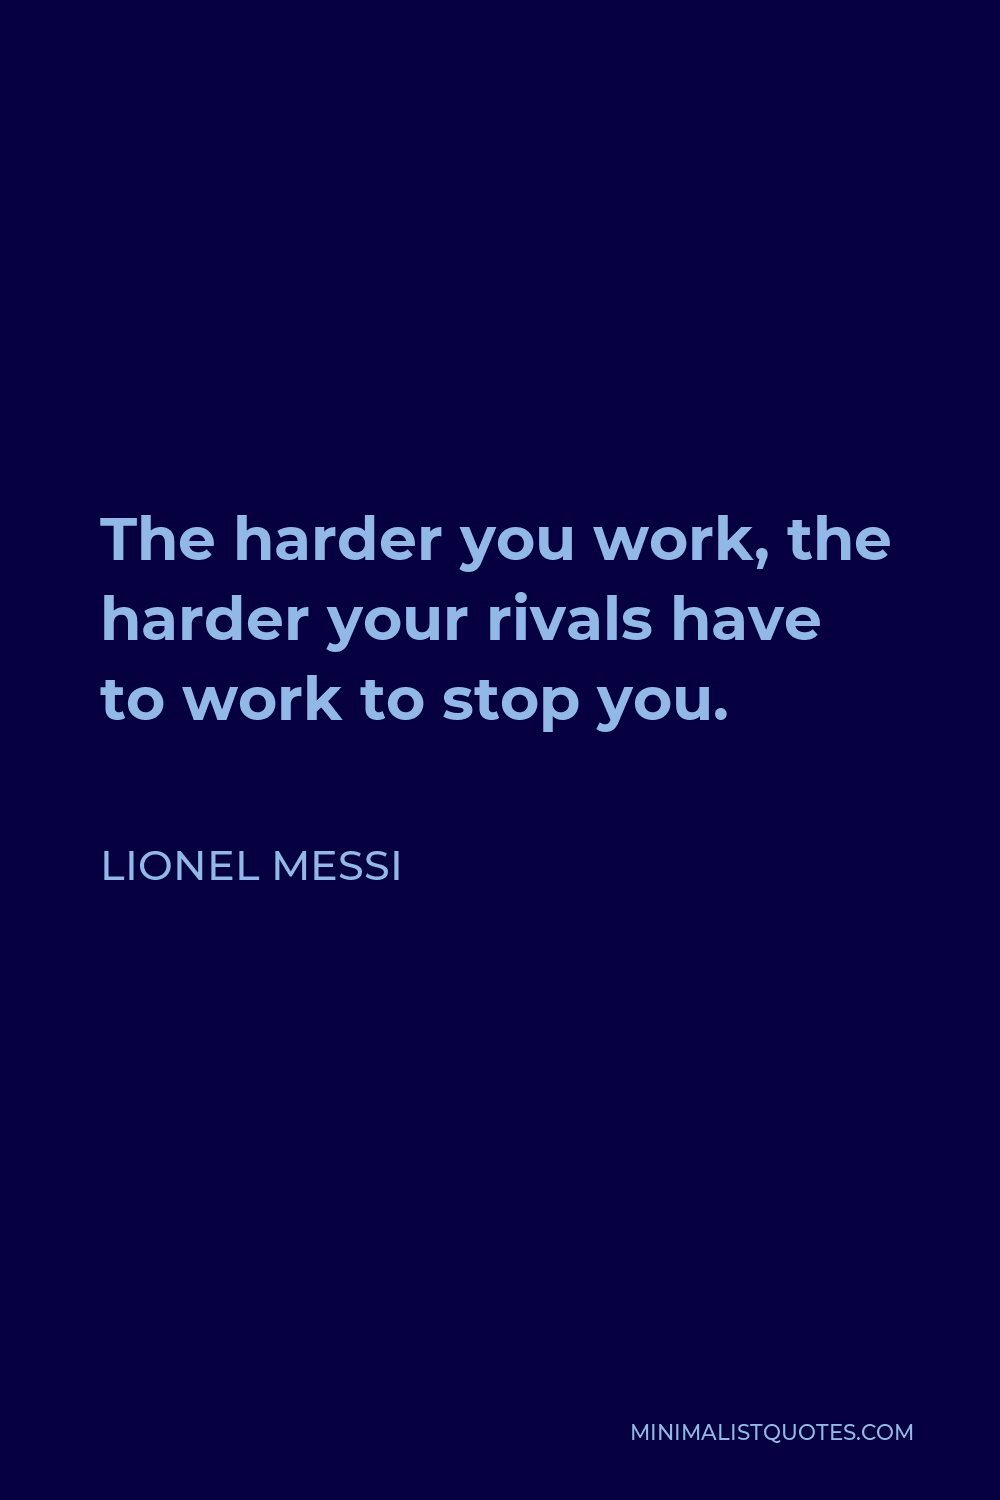 Lionel Messi Quote - The harder you work, the harder your rivals have to work to stop you.